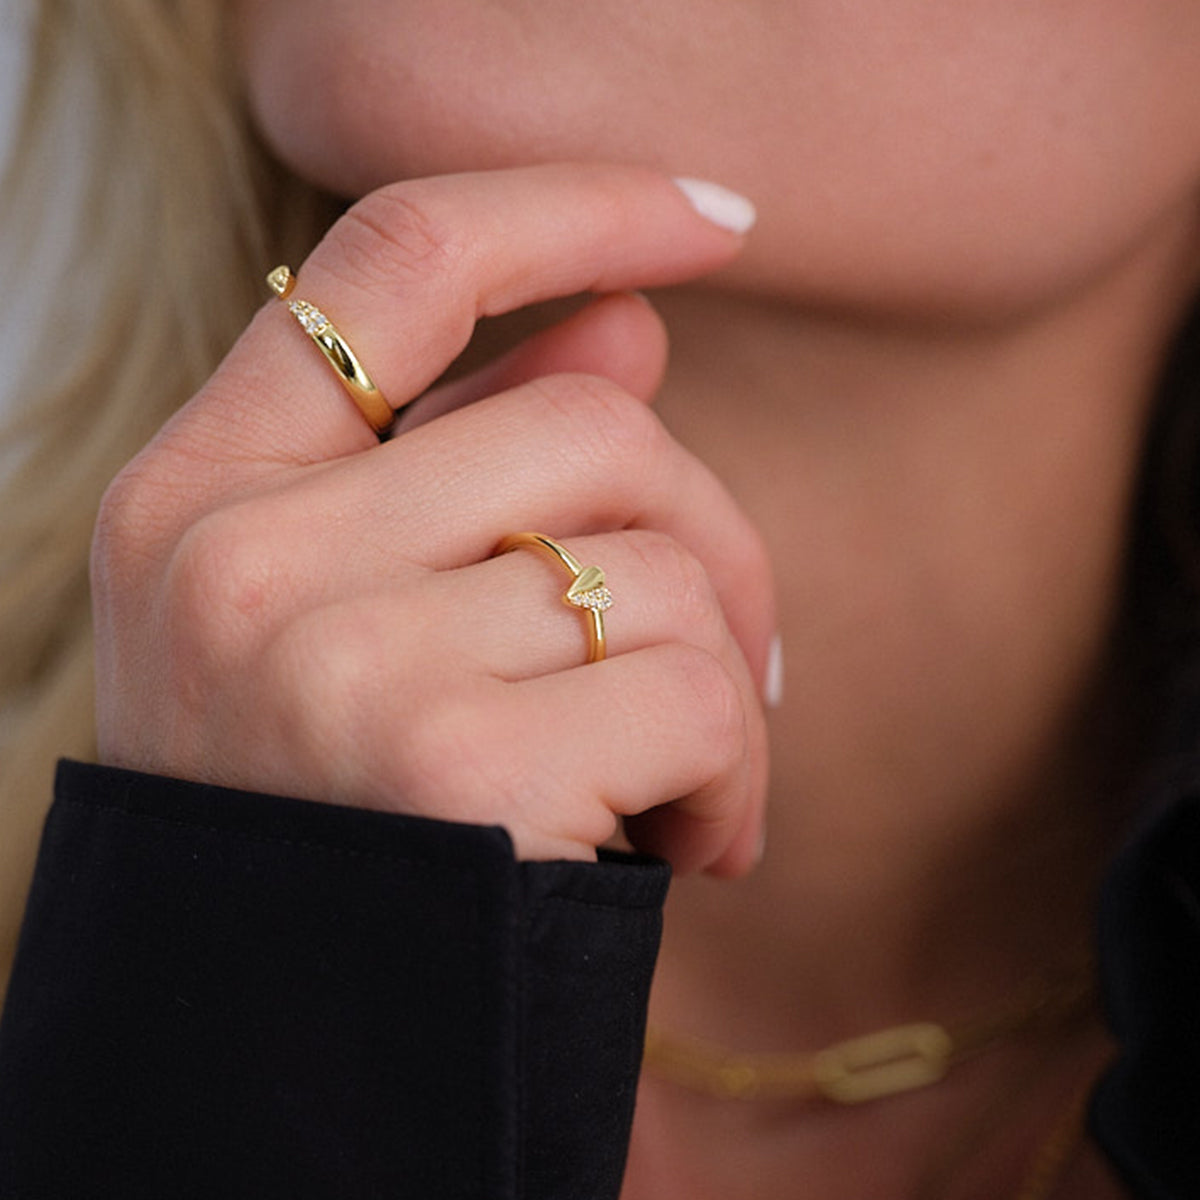 Other Half Heart Ring | Gold | KC Image | Uncommon James